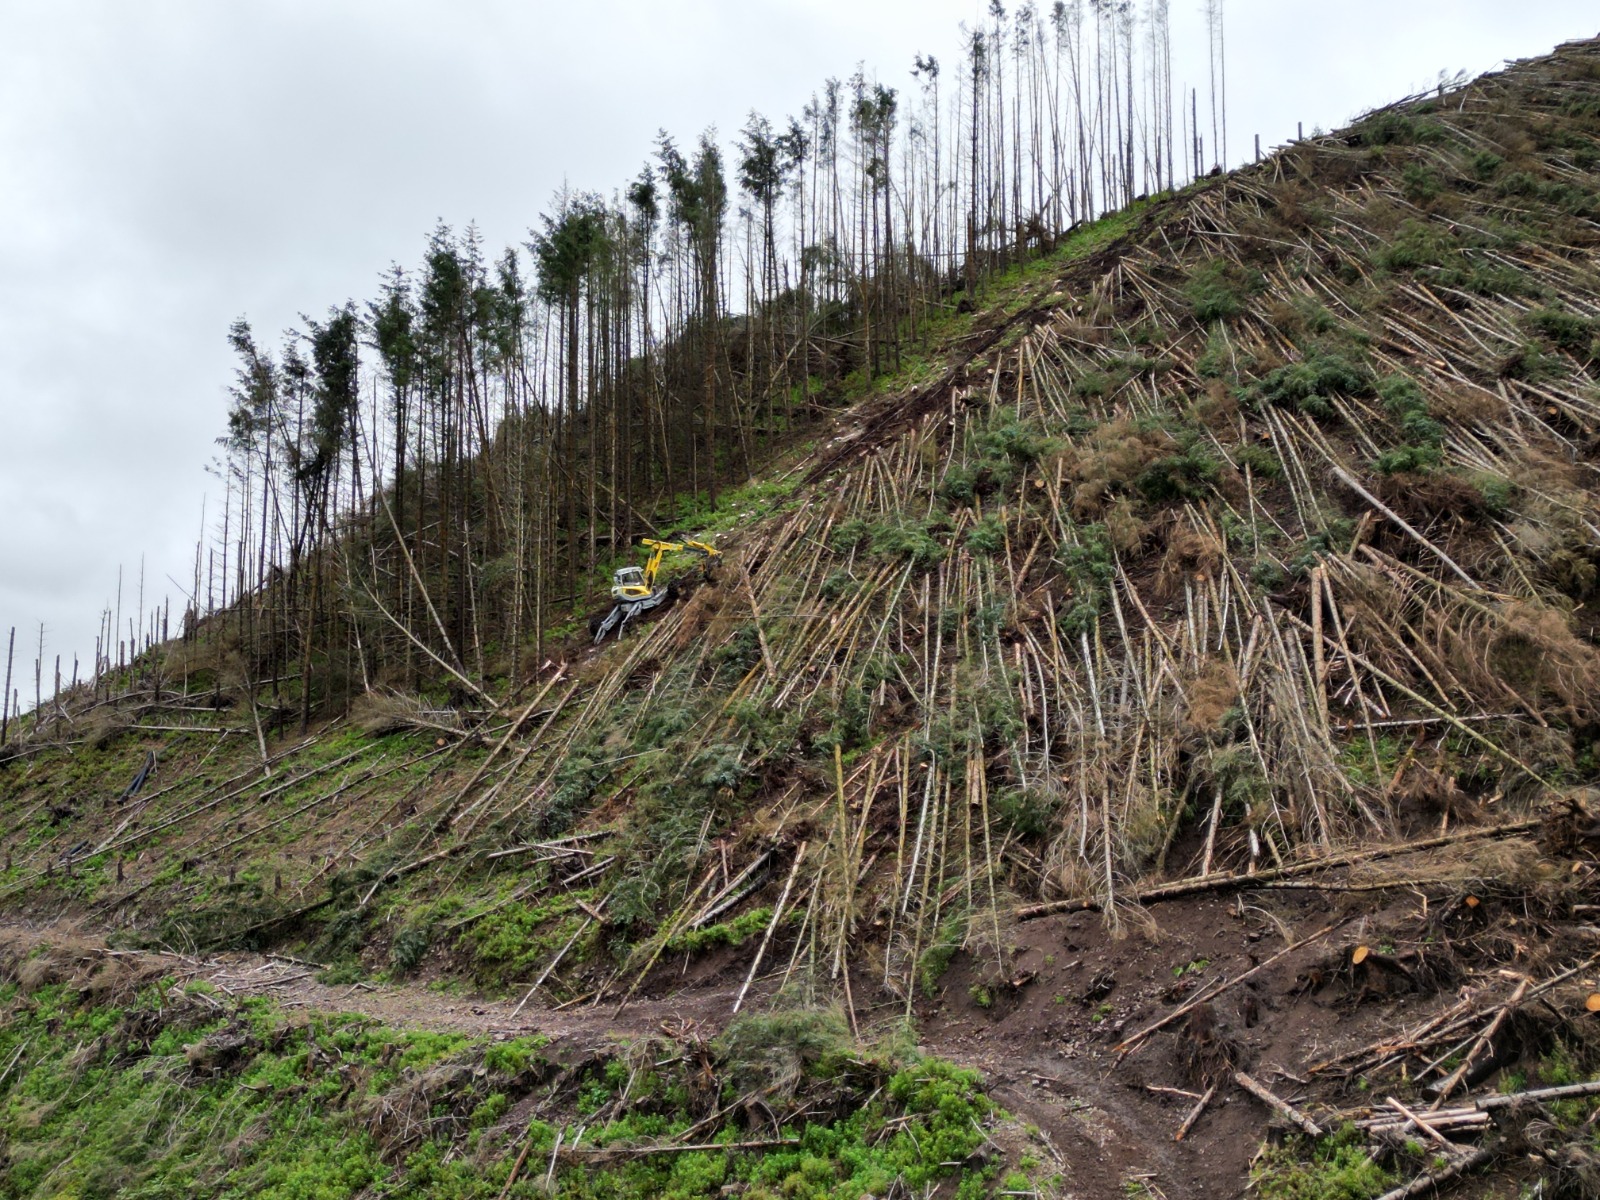 Menzi Muck M545X fitted with a Hultdins saw on a Powerhand grapple working on a steep slope